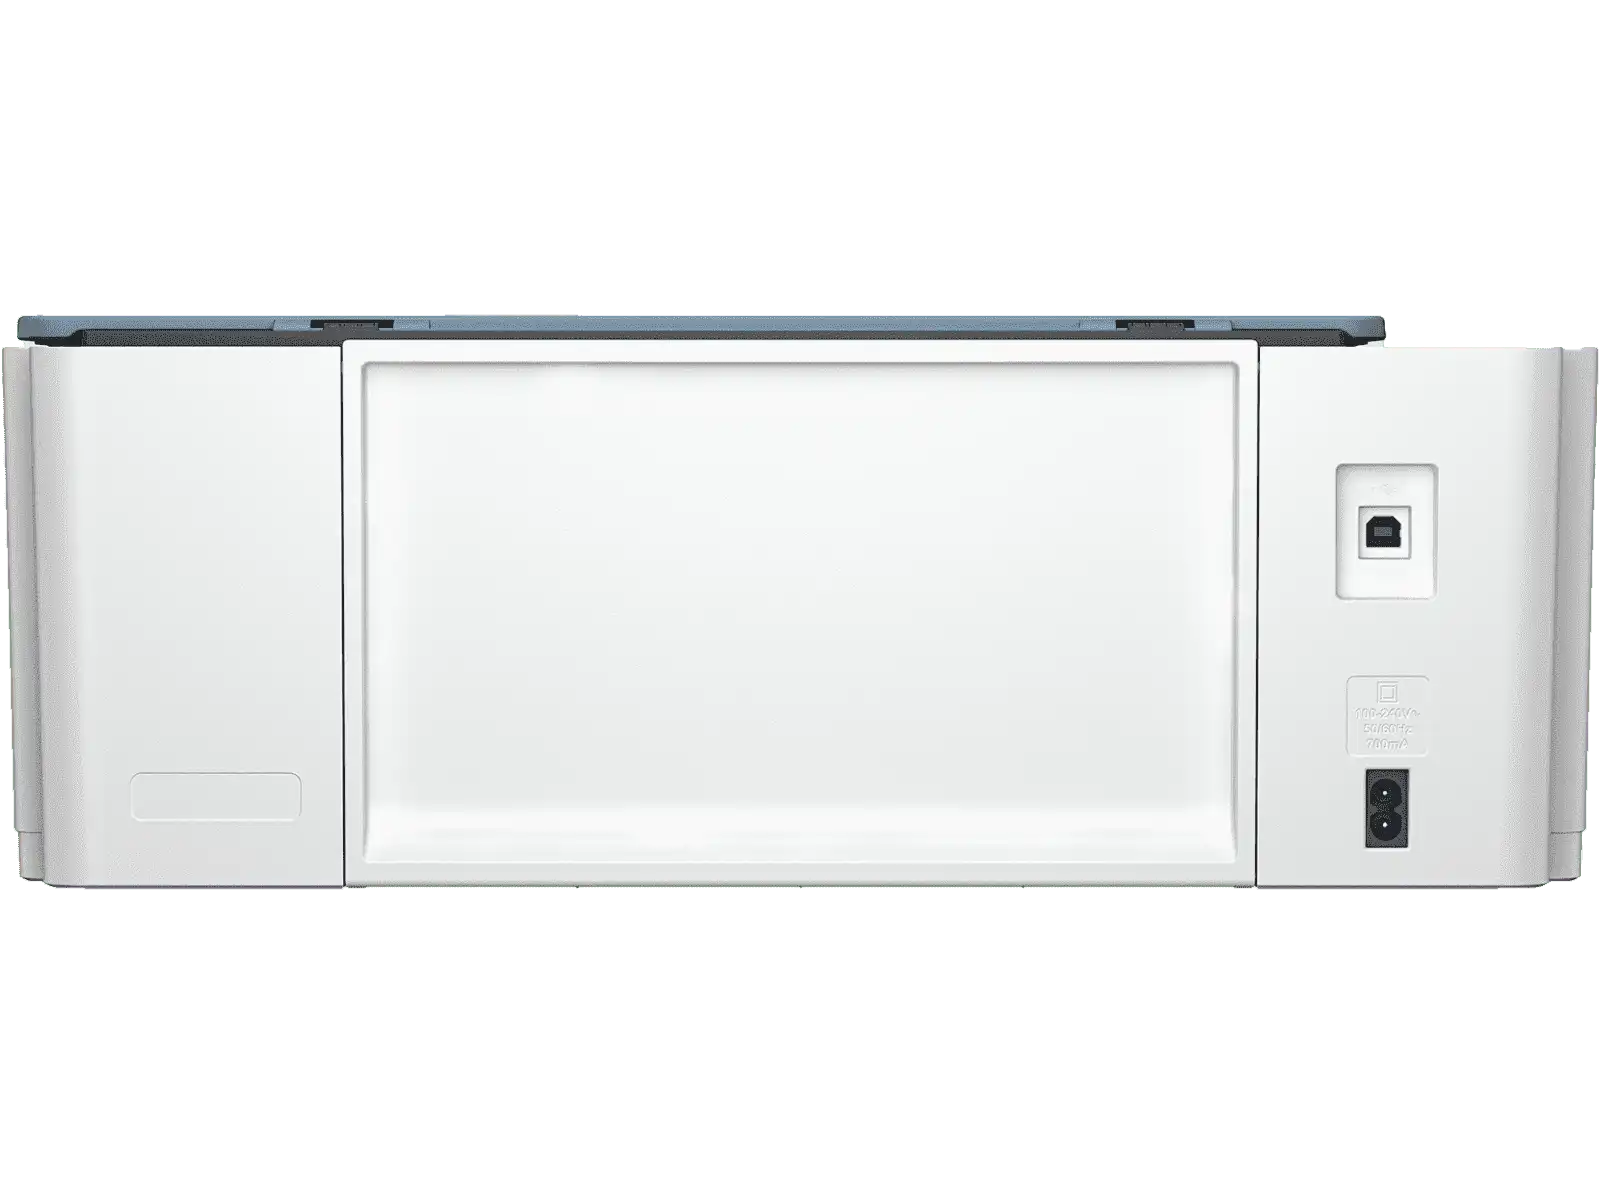 HP Smart Tank 585 All-in-One Printer